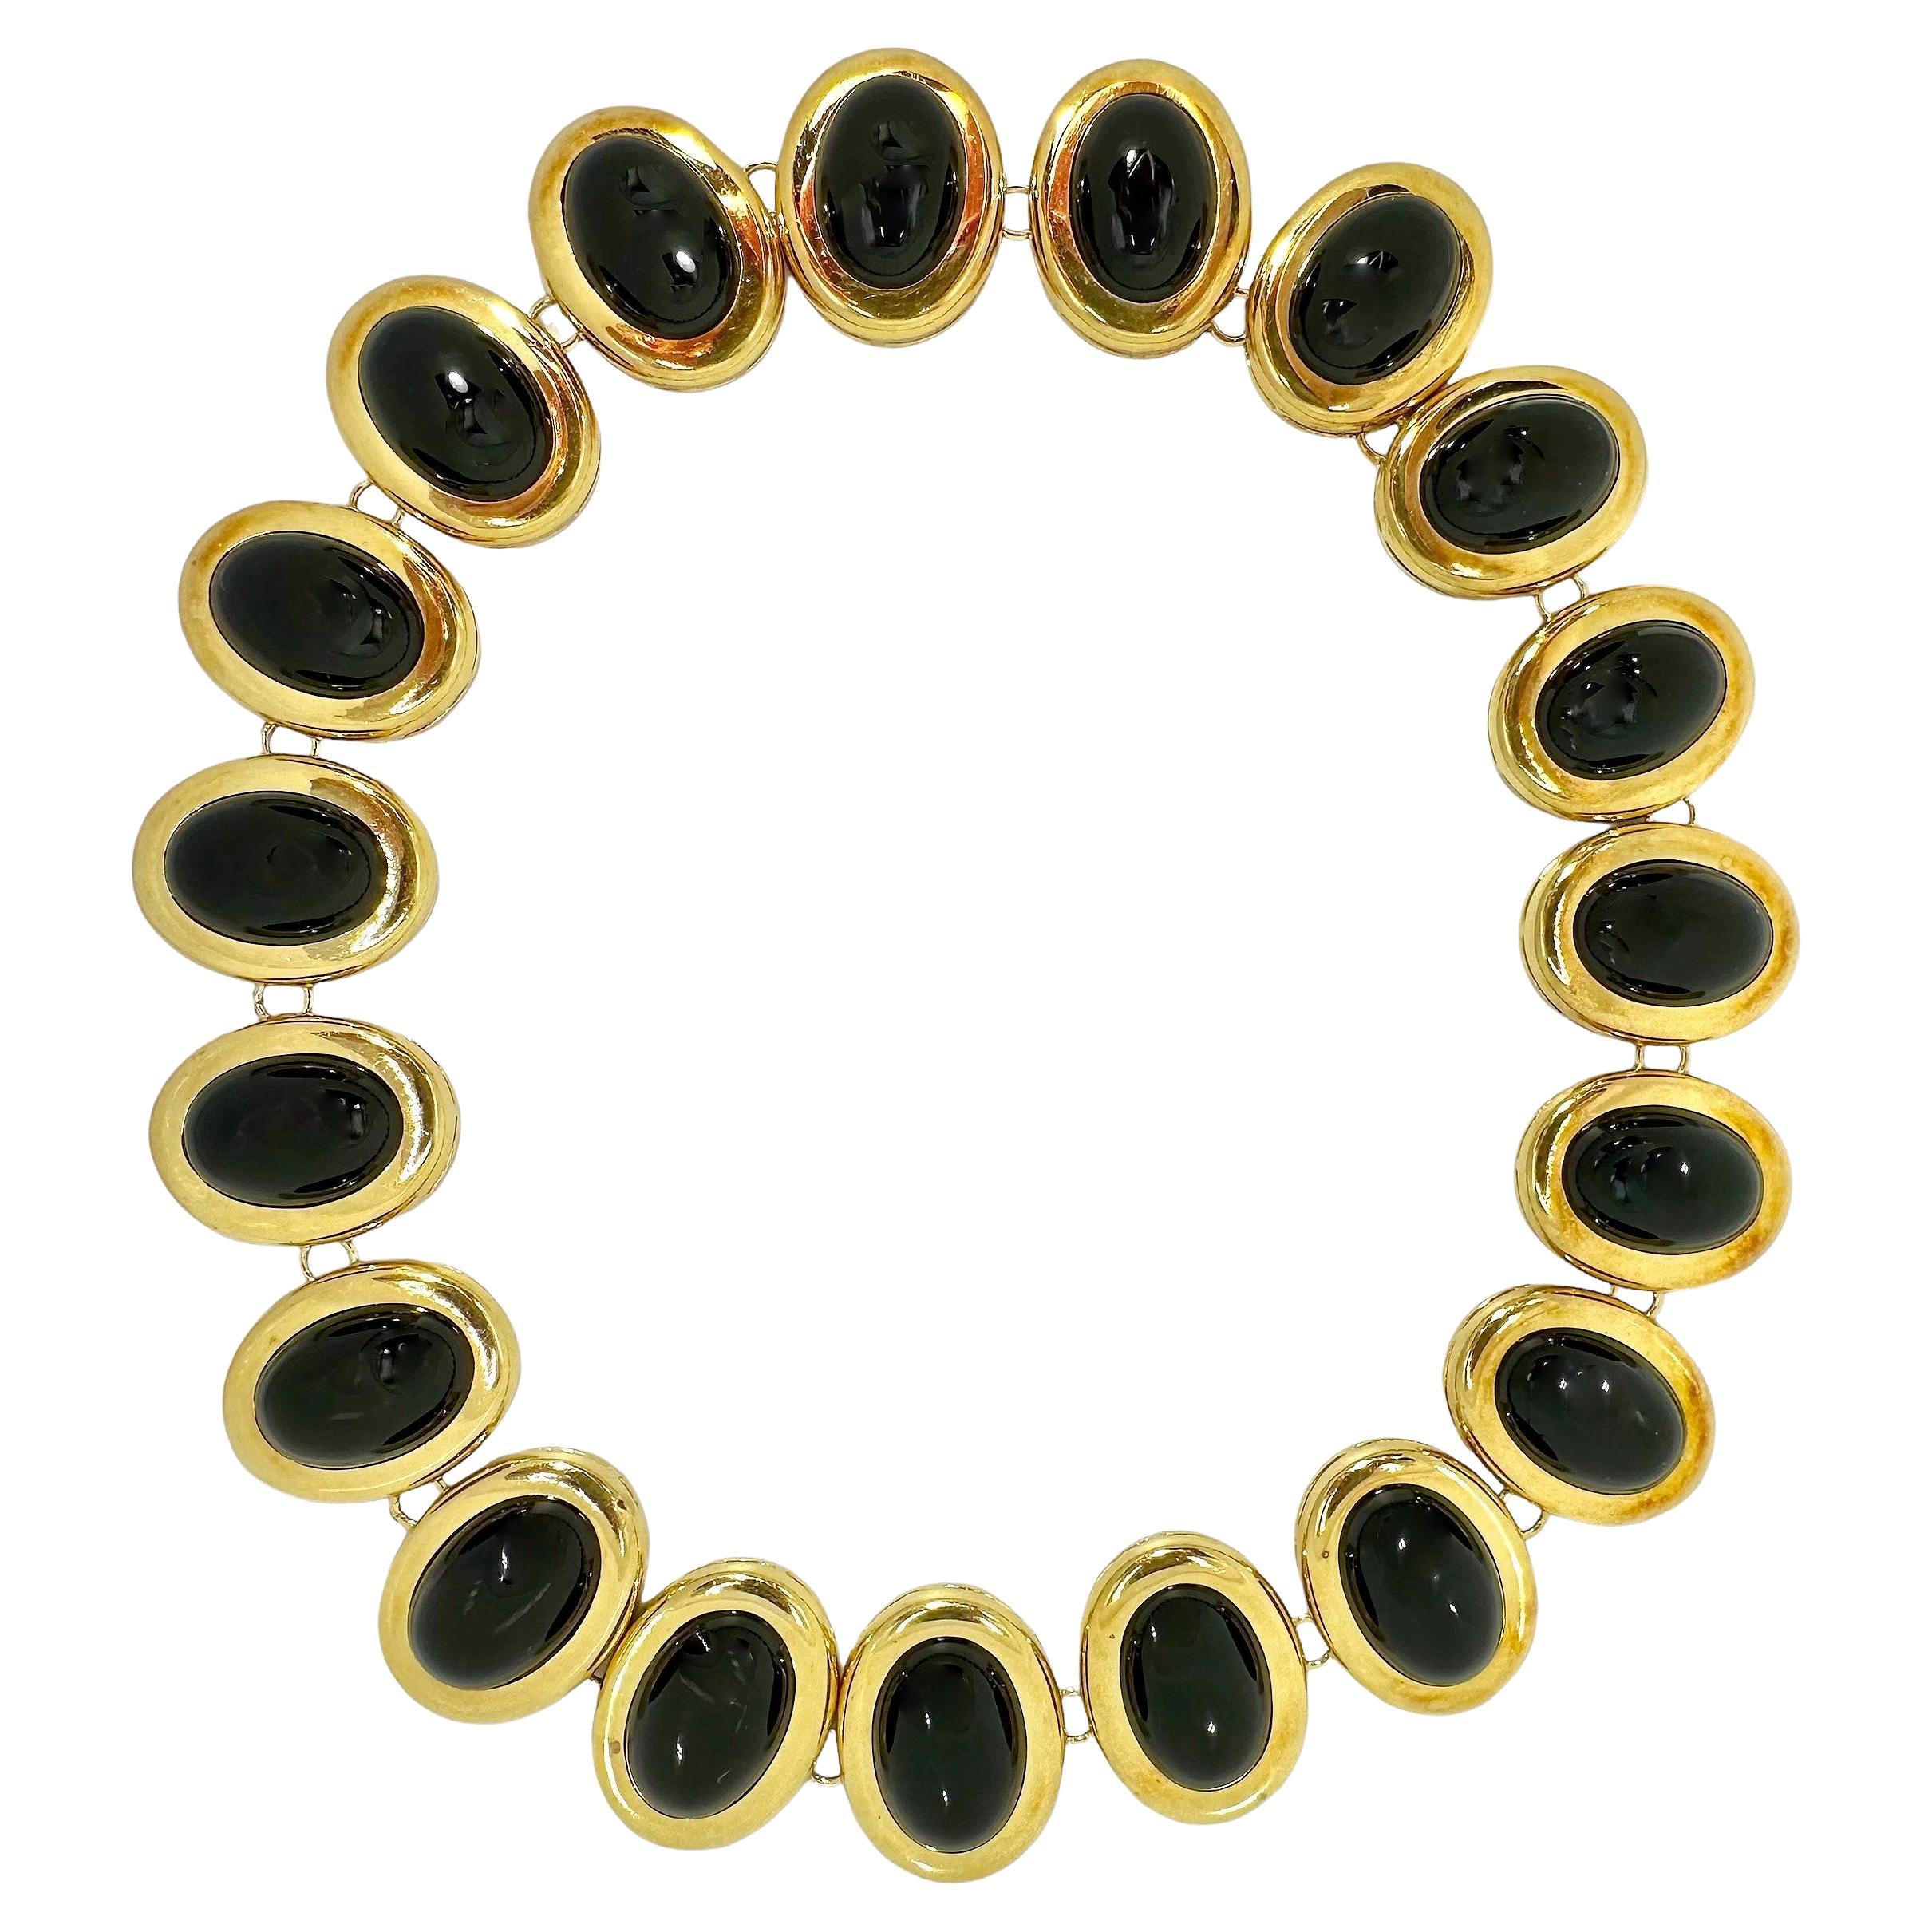 Stylish Mid-20th Century 18K Yellow Gold and Black Onyx Choker Length Necklace For Sale